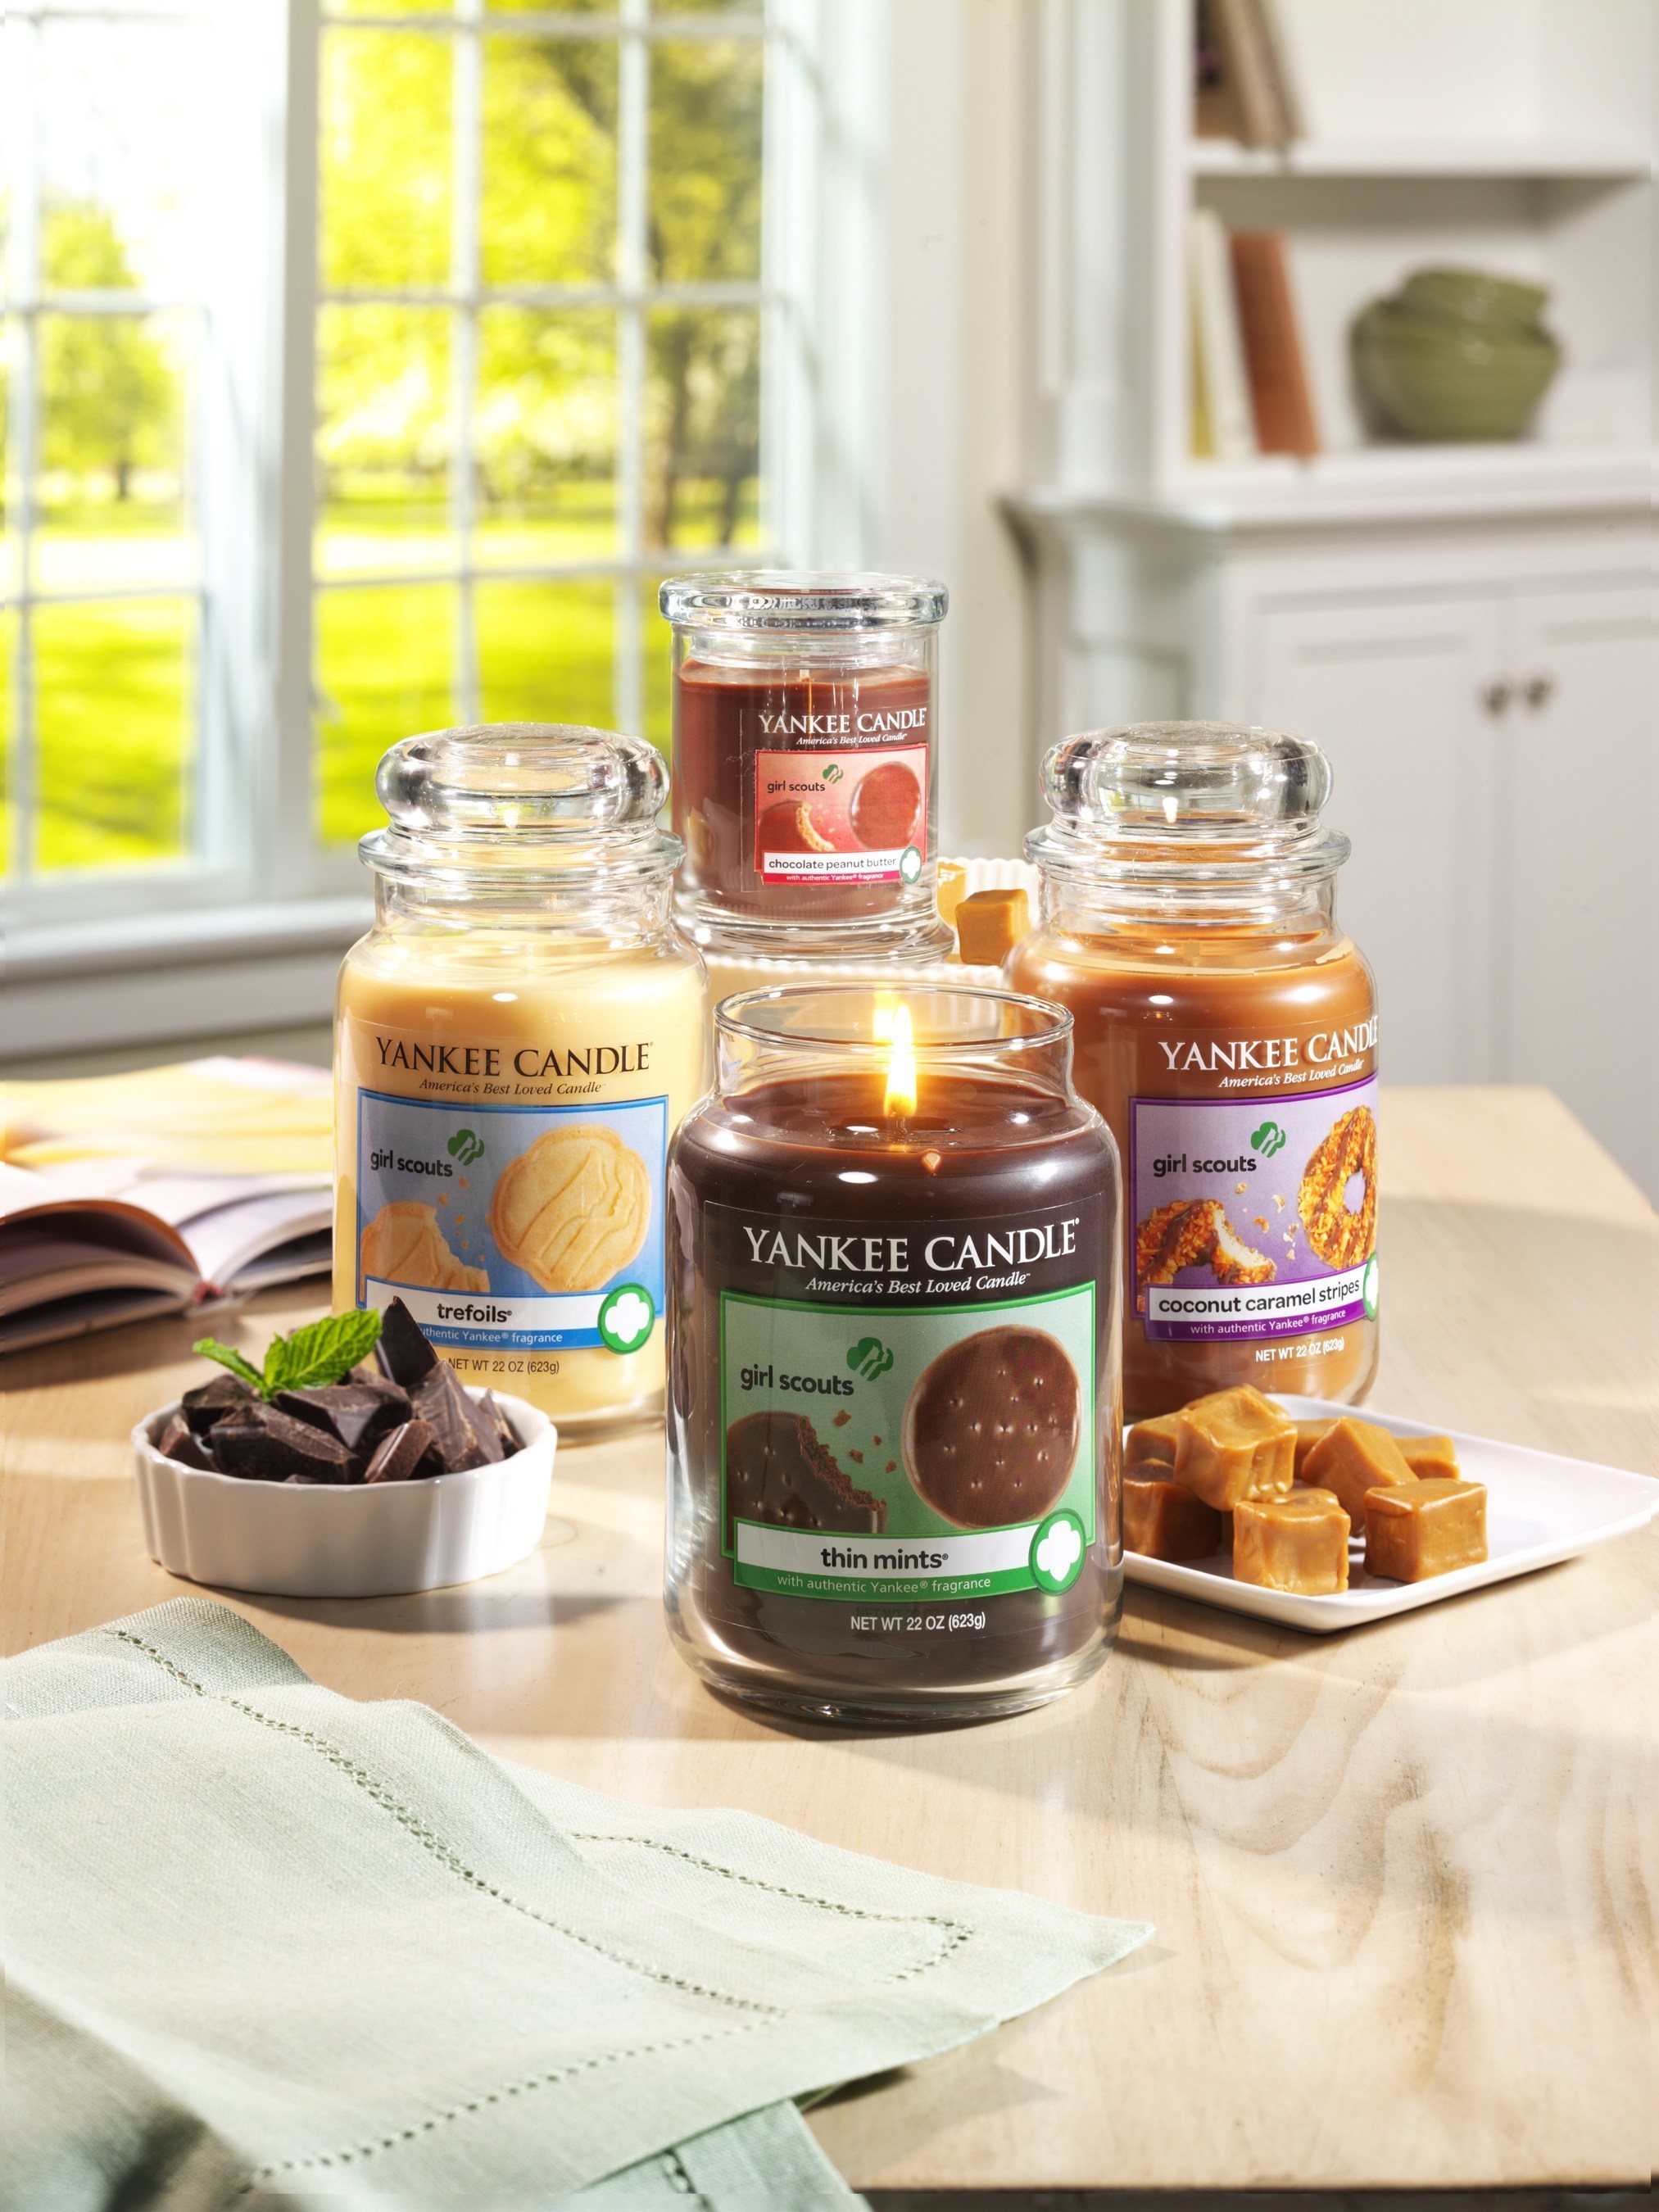 Introducing Yankee Candle's delicious new Girl Scout Cookies Limited Edition Candle Collection.